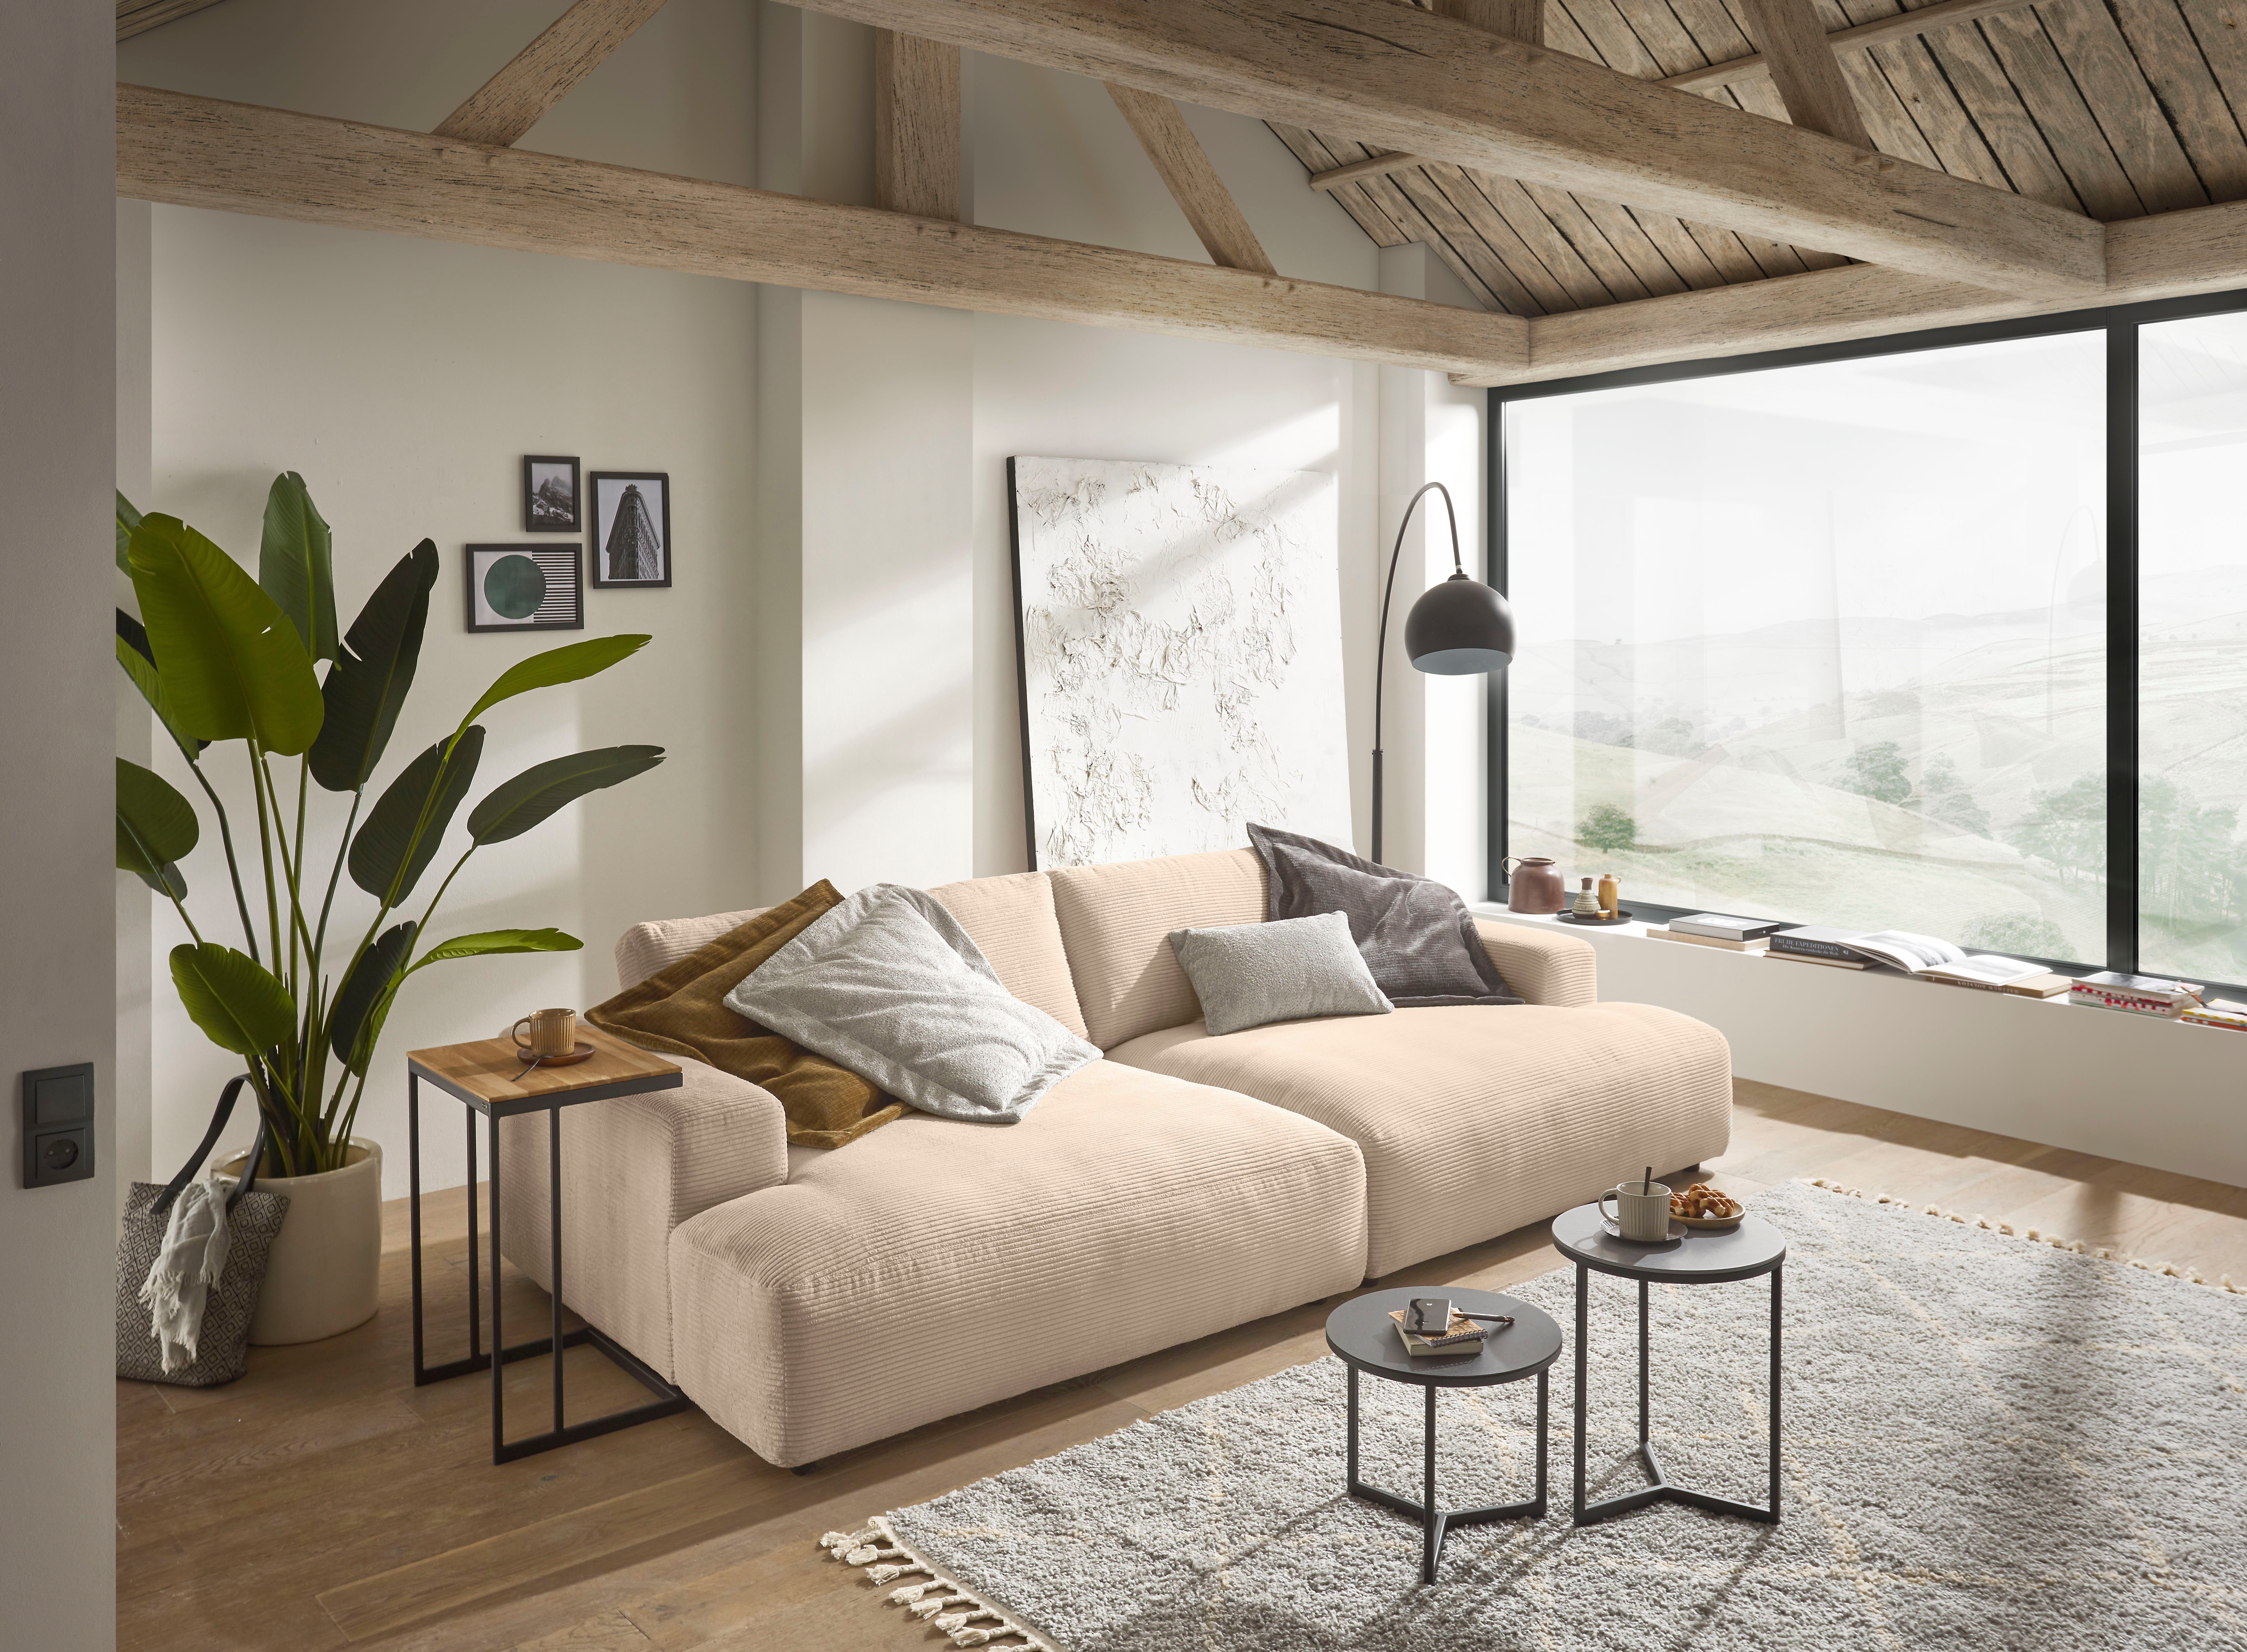 GALLERY M branded by Musterring 292 Lucia, nature Cord-Bezug, Breite cm Loungesofa